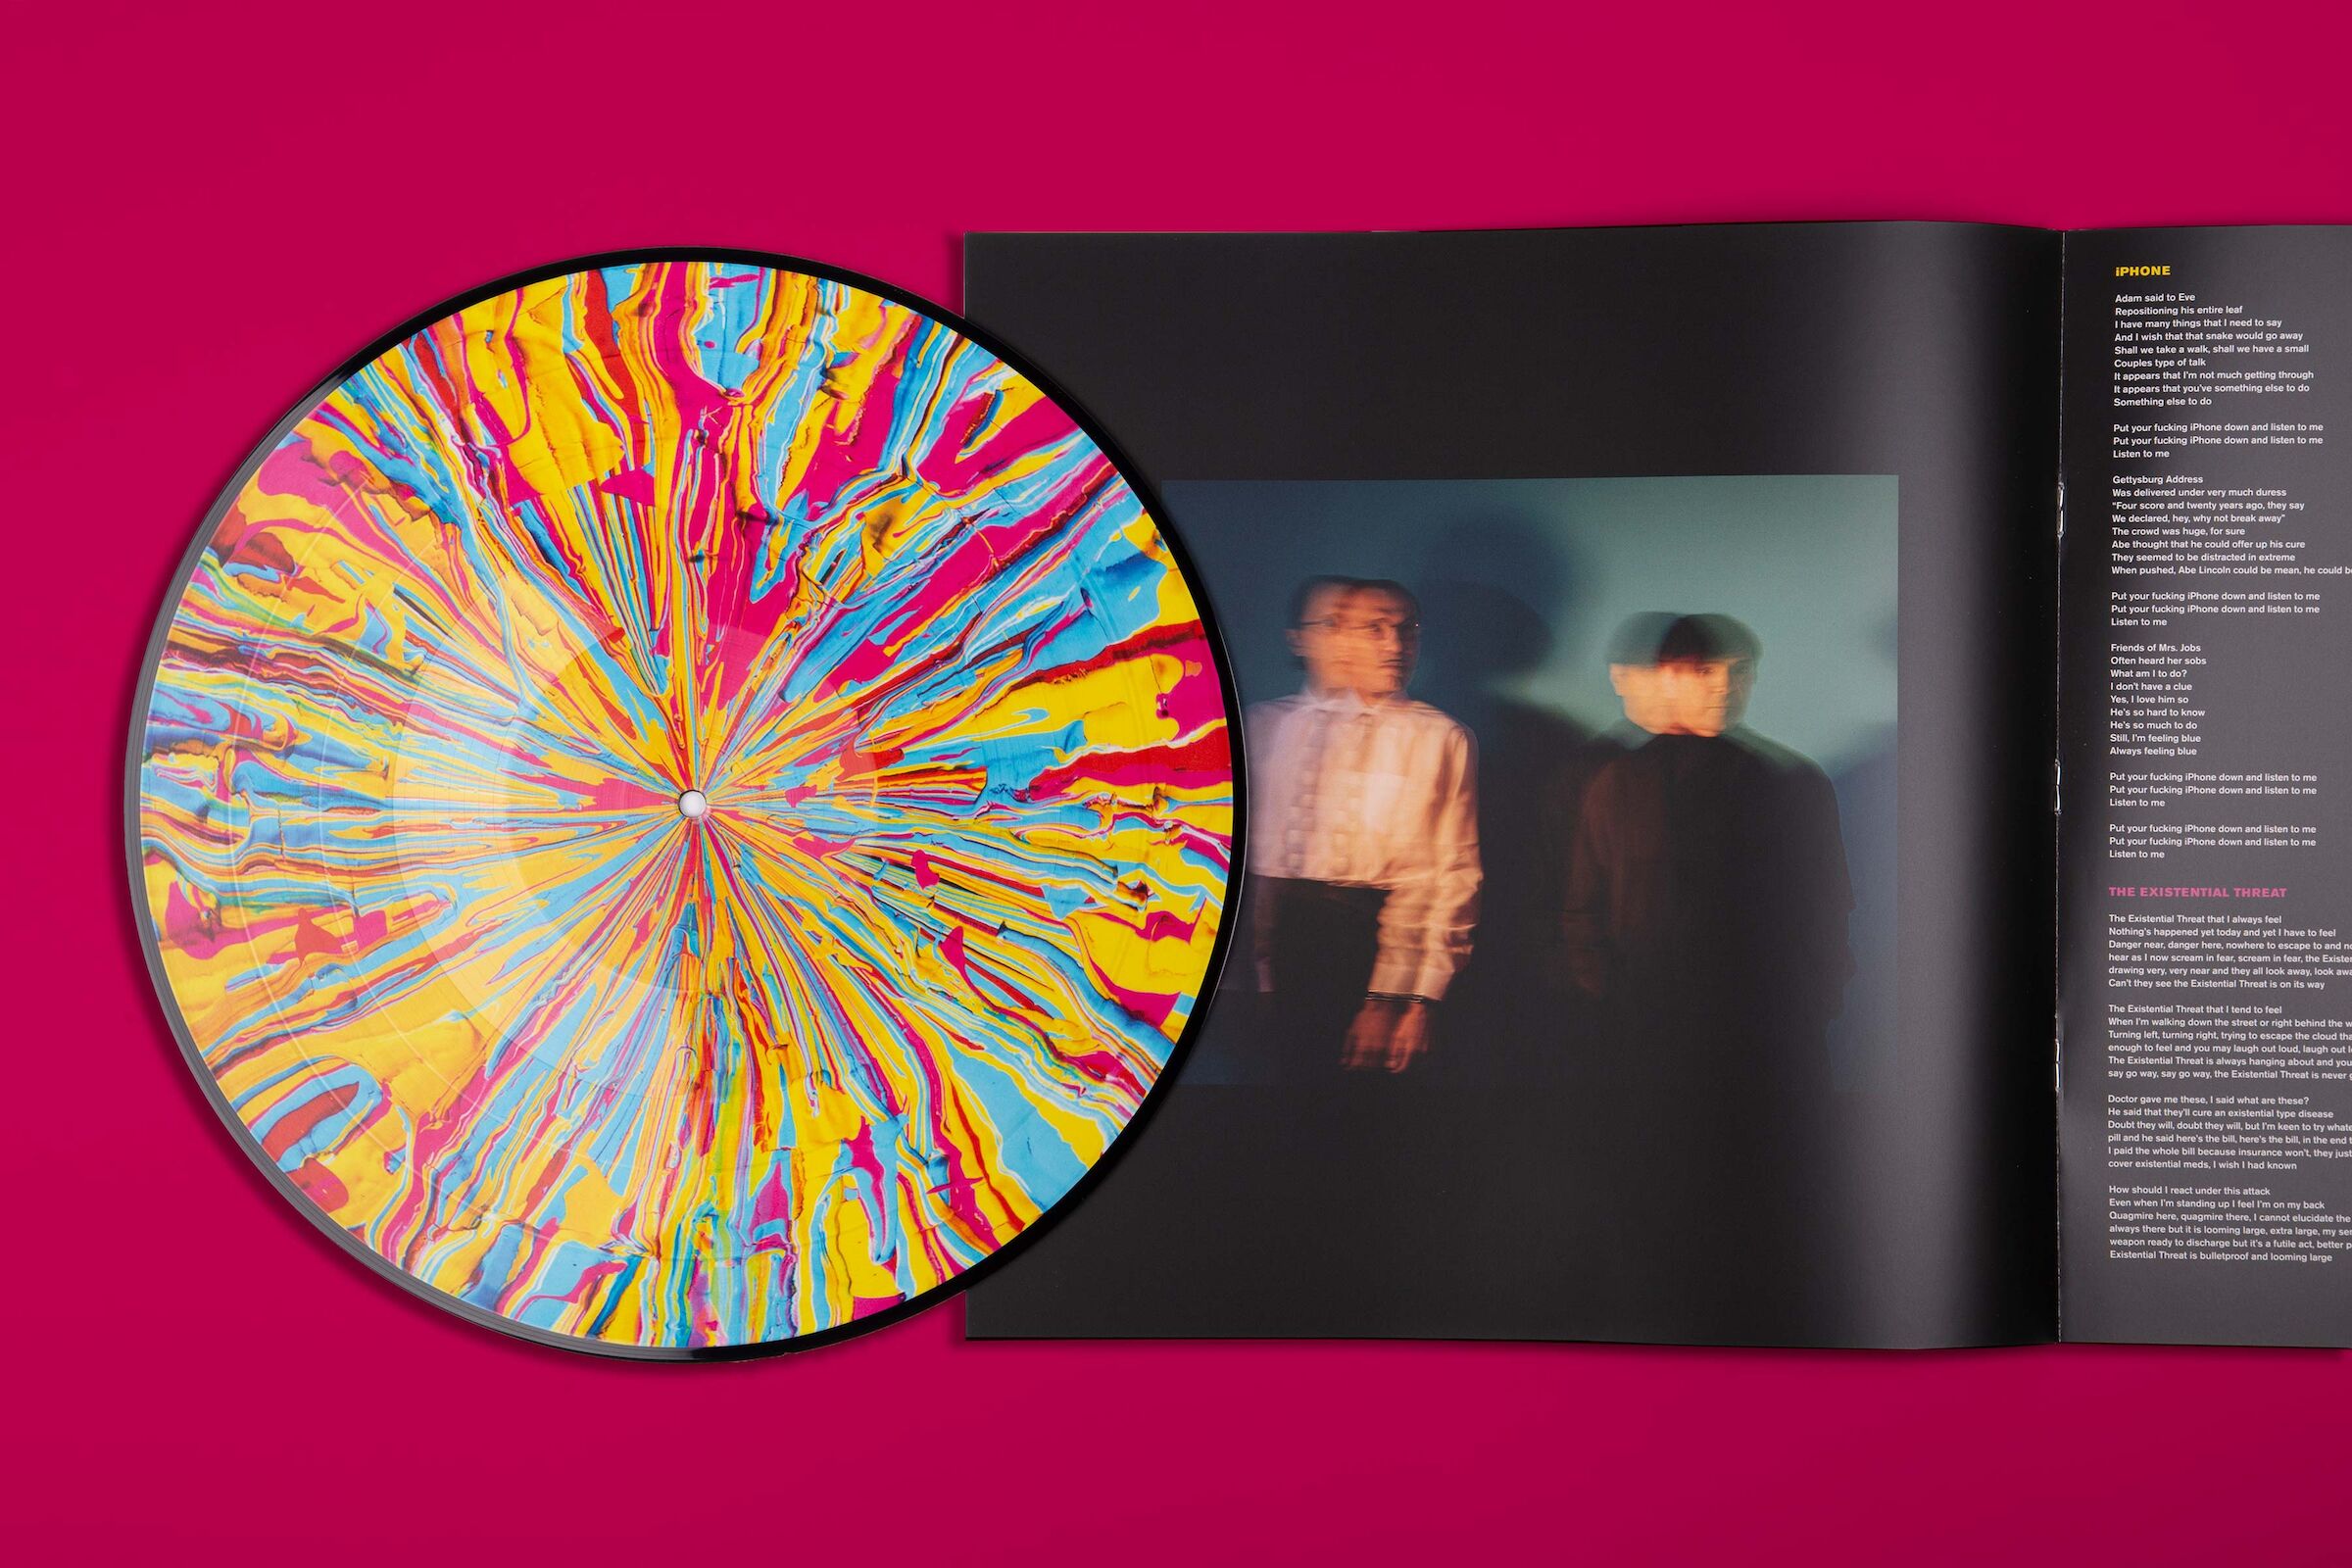 Sparks ‘A Steady Drip, Drip, Drip’ Vinyl 12" book and picture disc